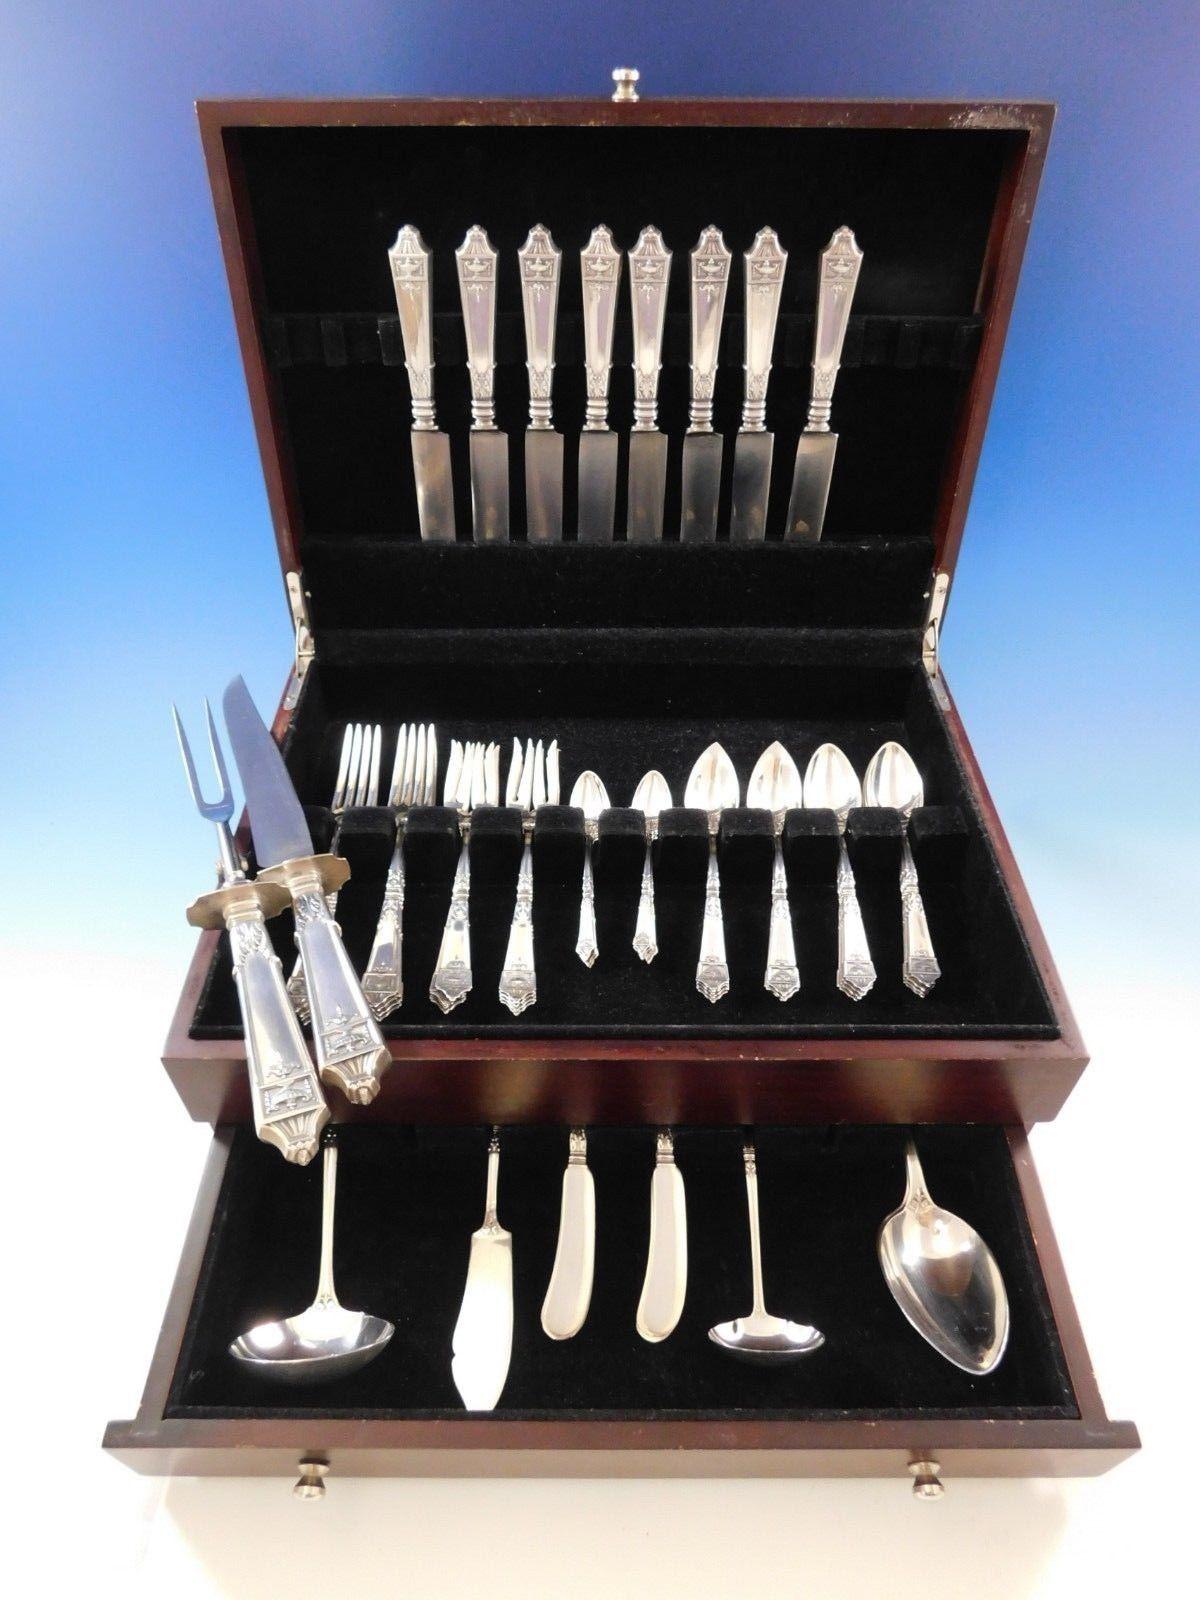 Lansdowne by Gorham sterling silver flatware set - 63 pieces. This set includes:

Eight knives, 8 1/2